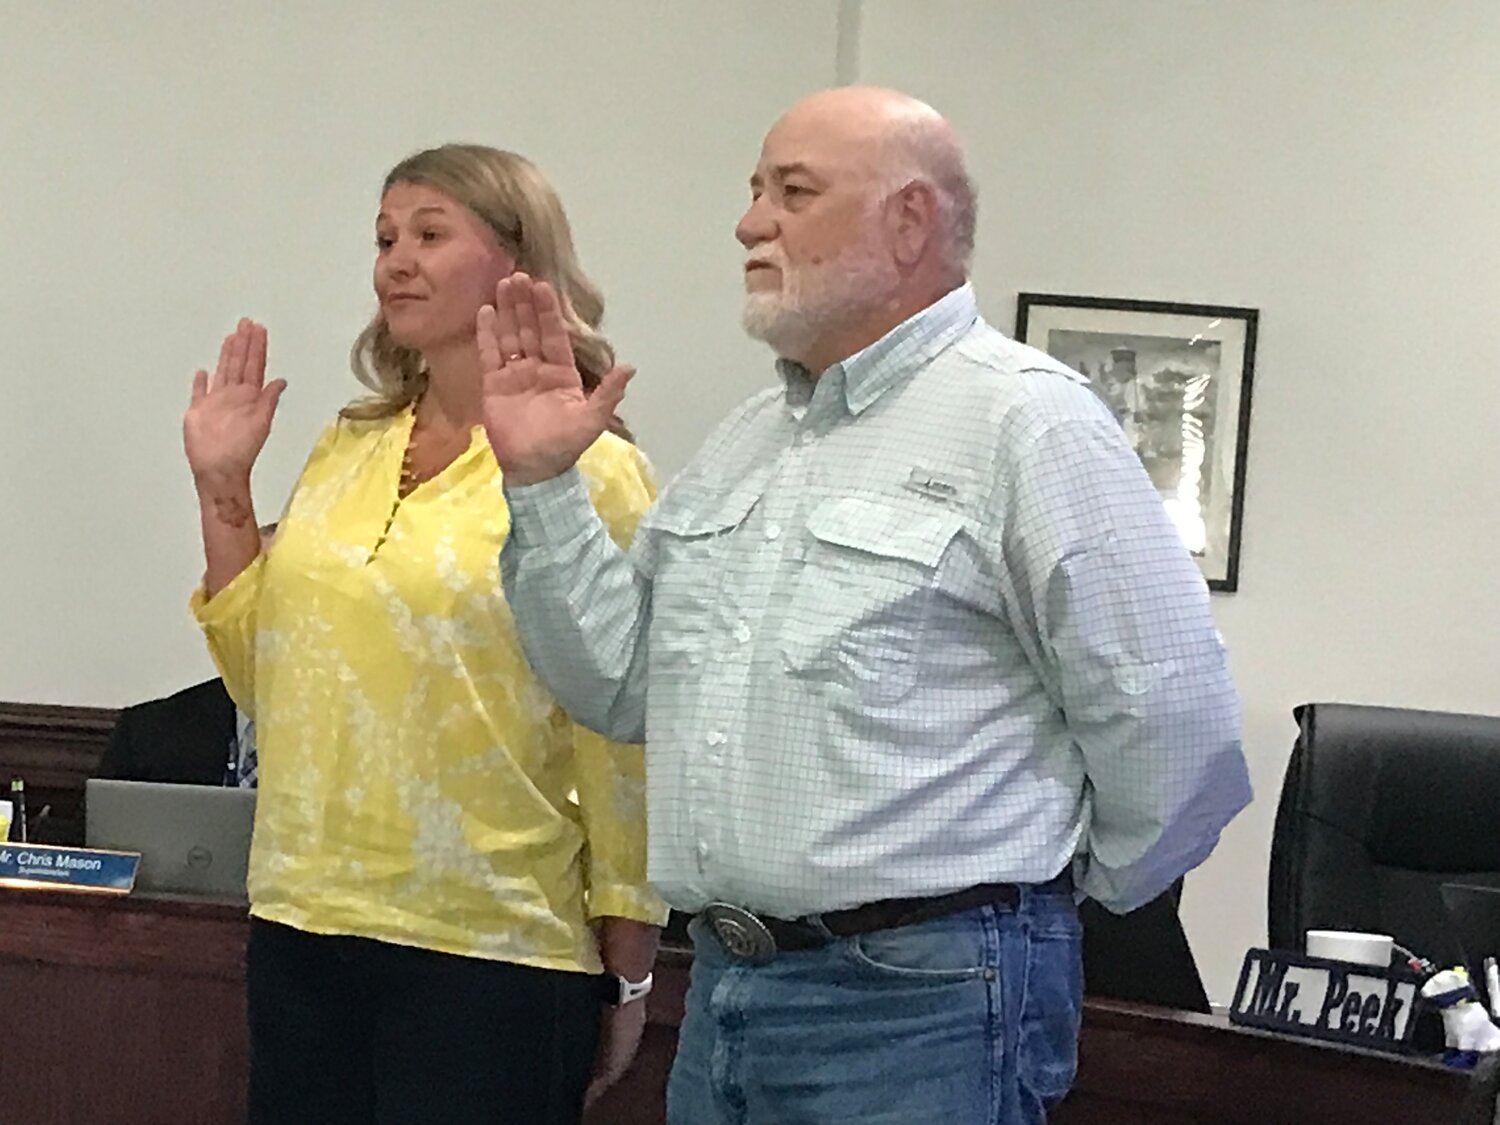 Quitman School Board members Vanessa Simpkins and James Hicks take the oath of office at last week’s board meeting.